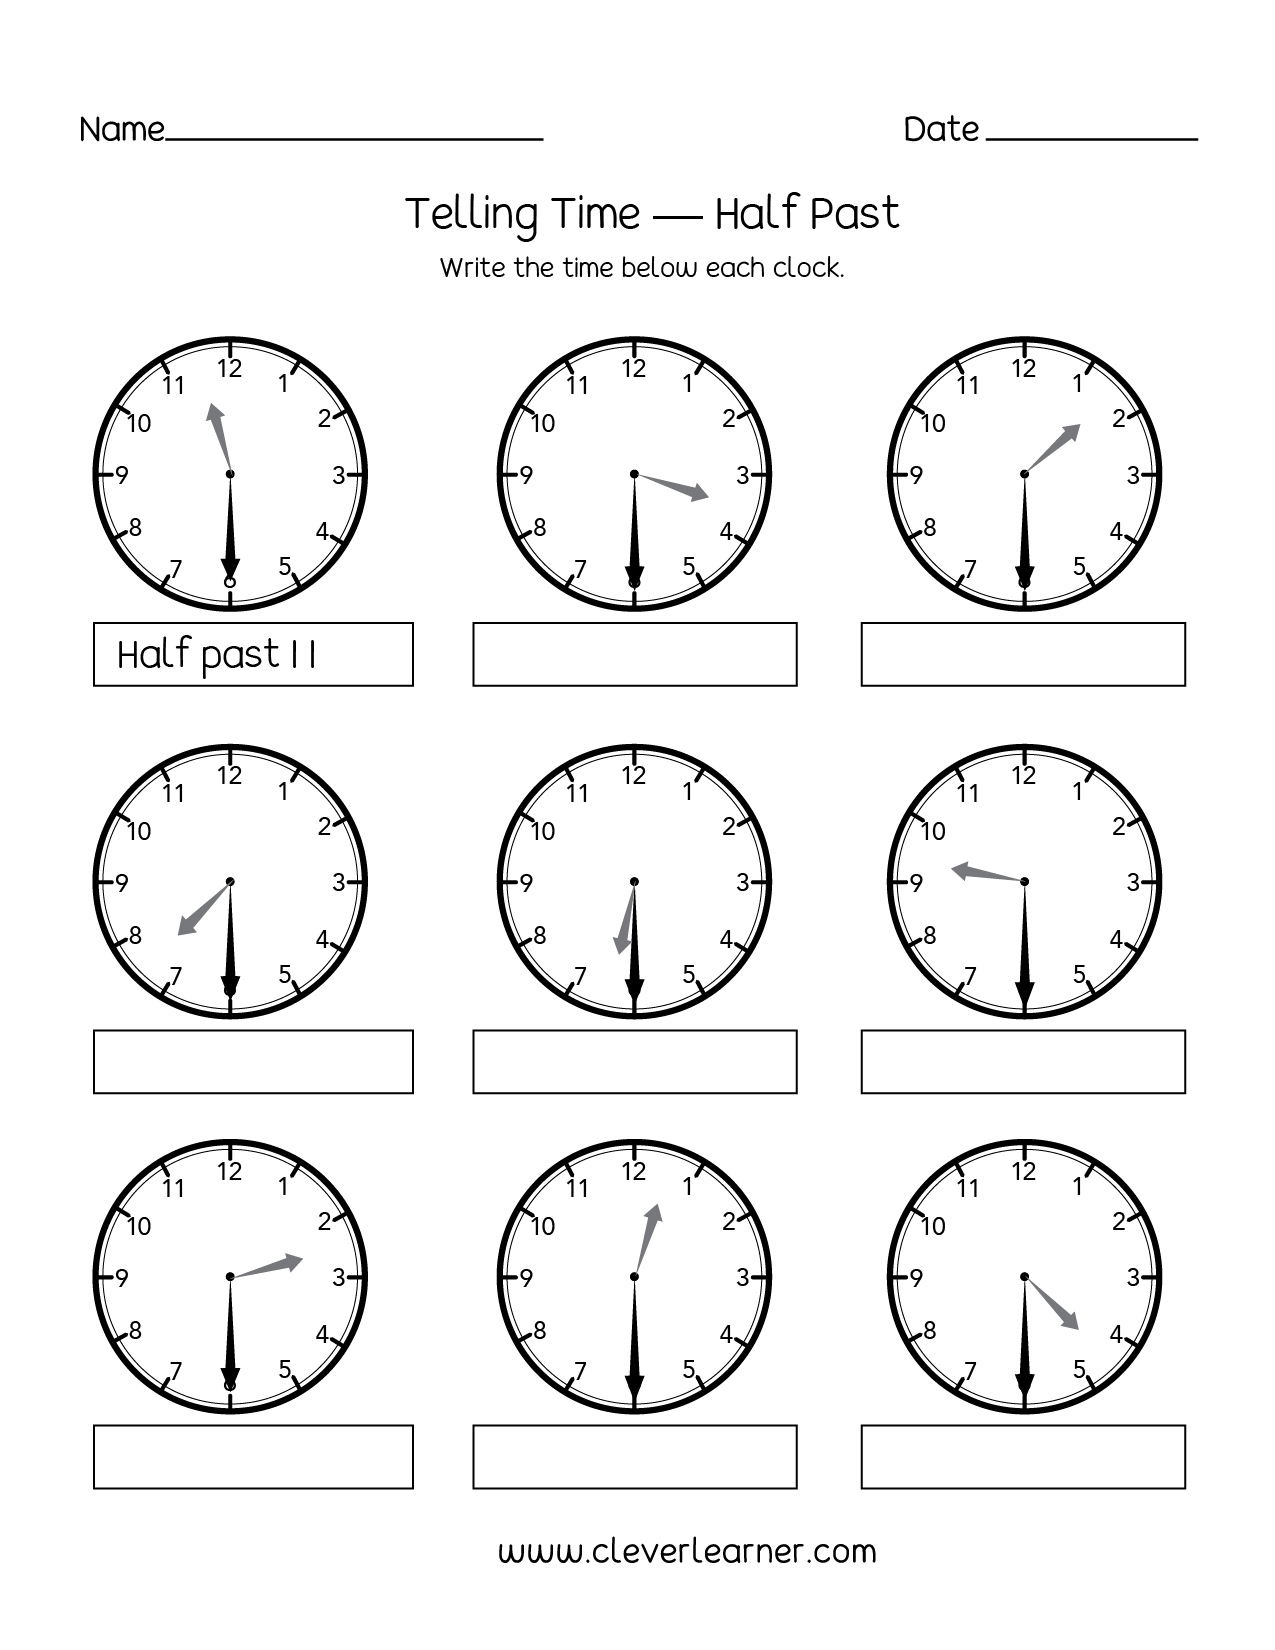 second-grade-math-worksheets-free-printable-k5-learning-telling-time